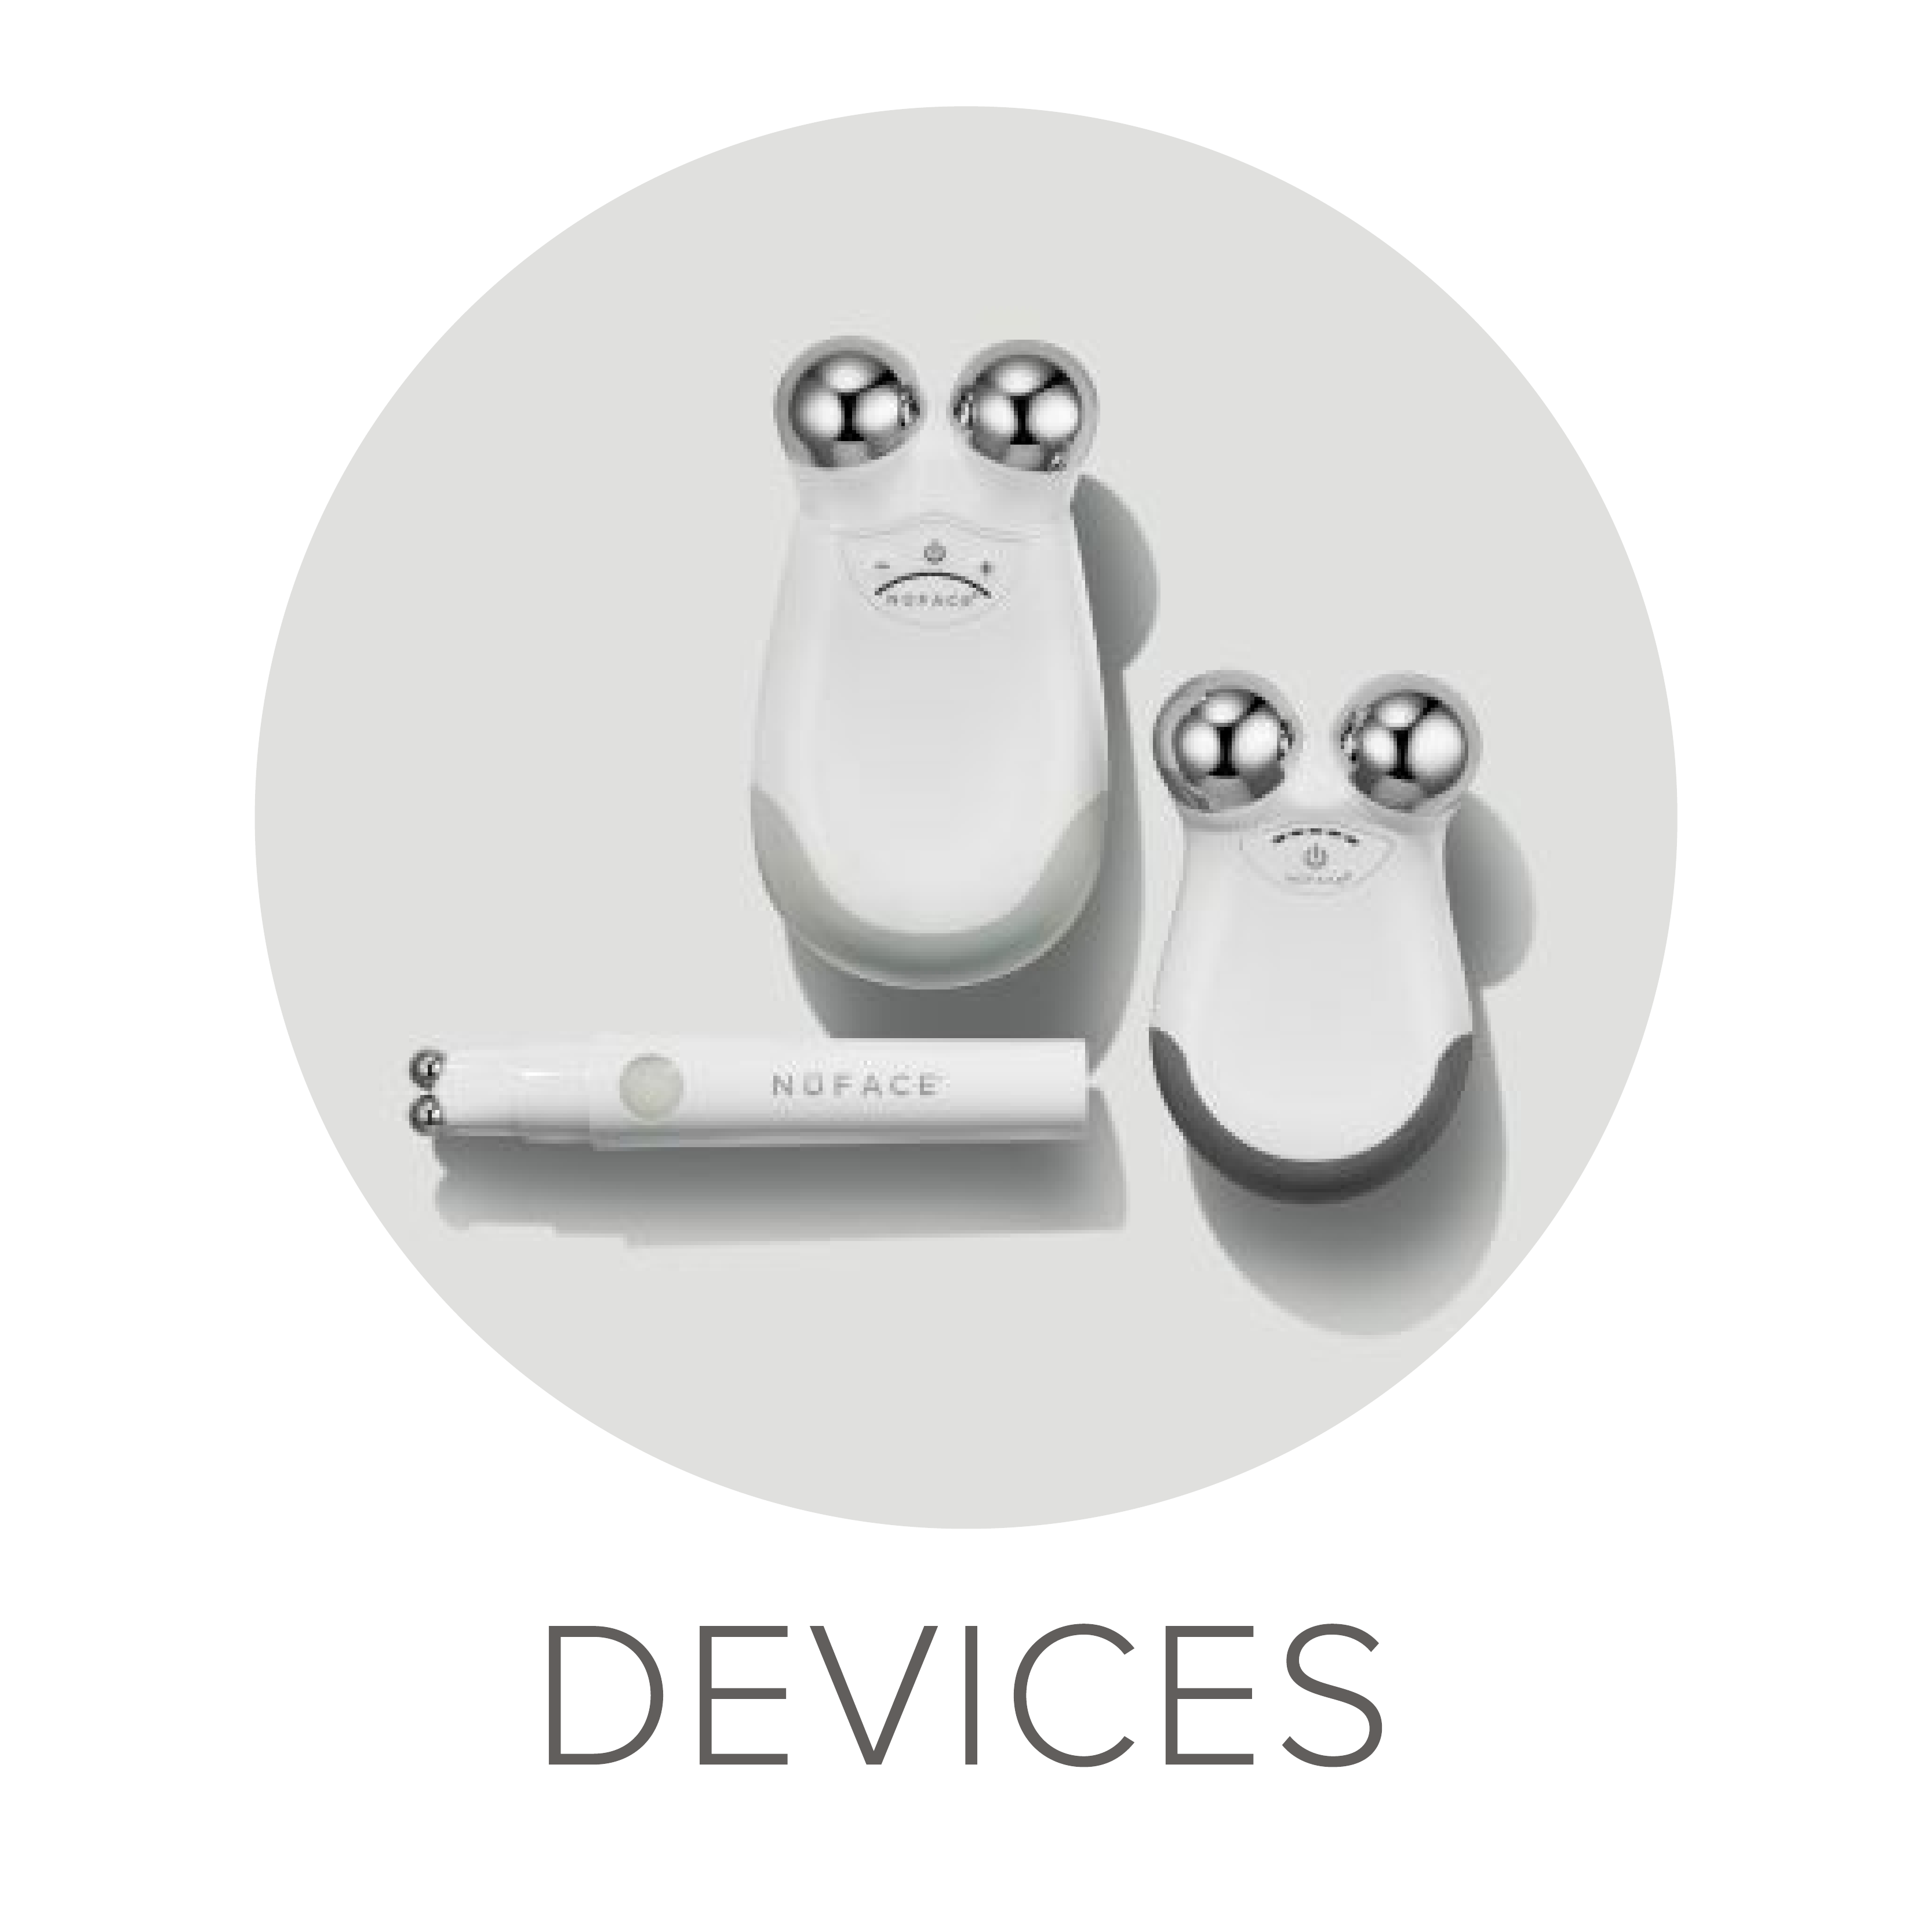 DEVICES